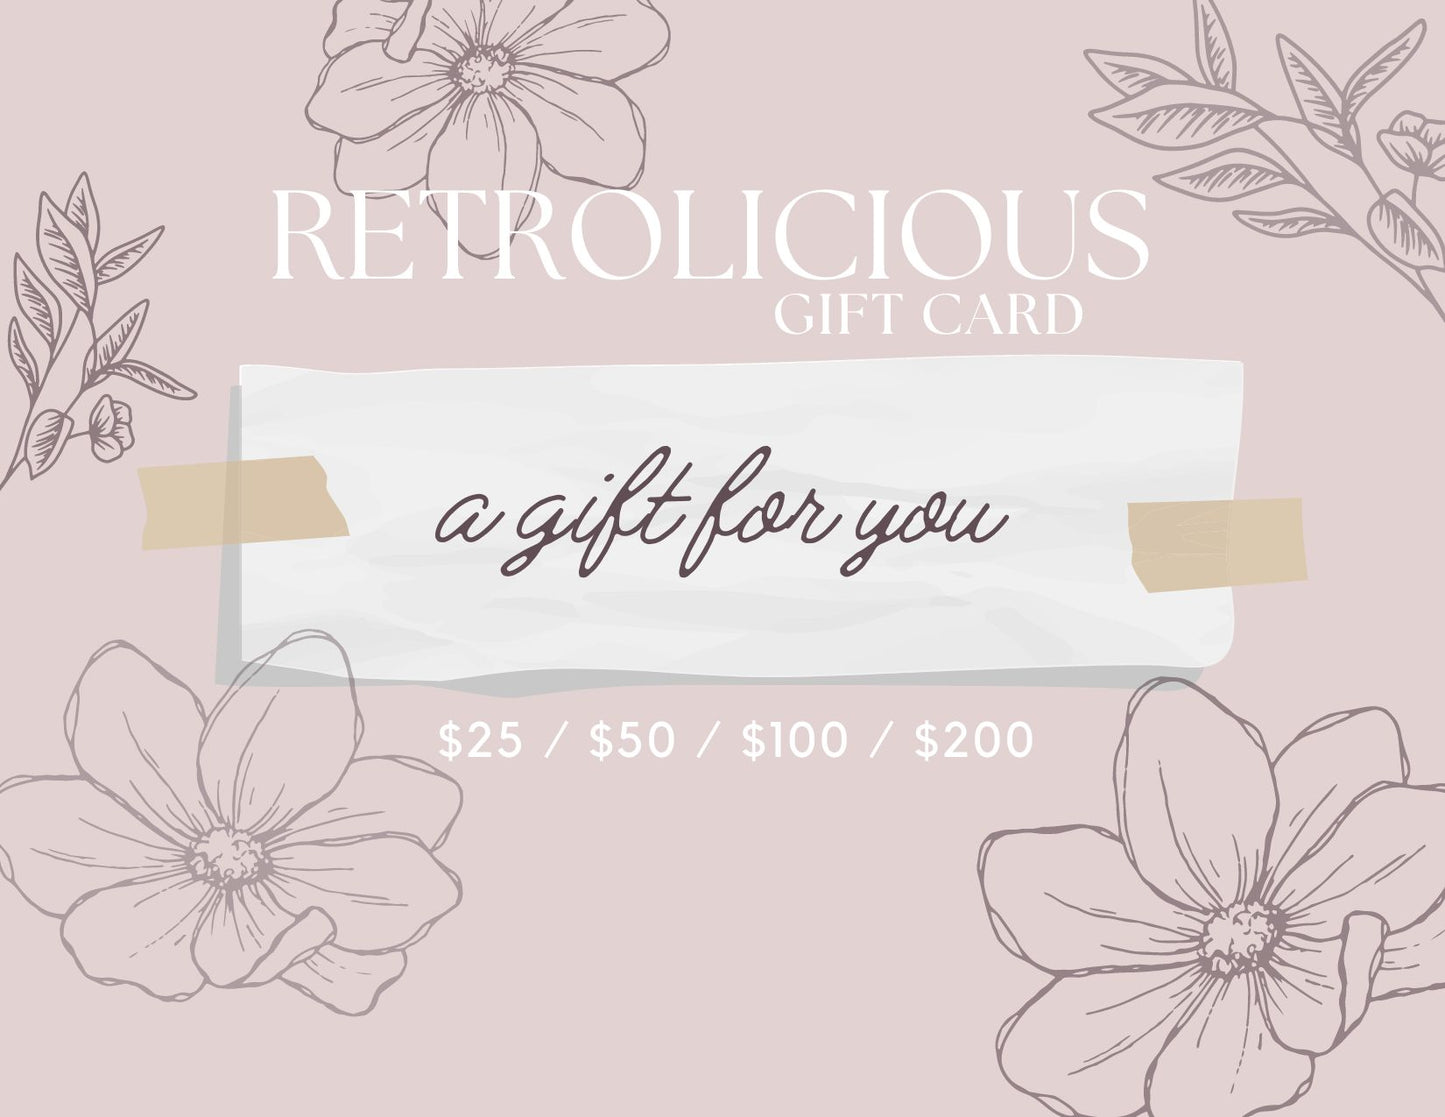 light pink background with flower sketches with text saying Retrolicious gift card, a gift for you $25/$50/$100/$200